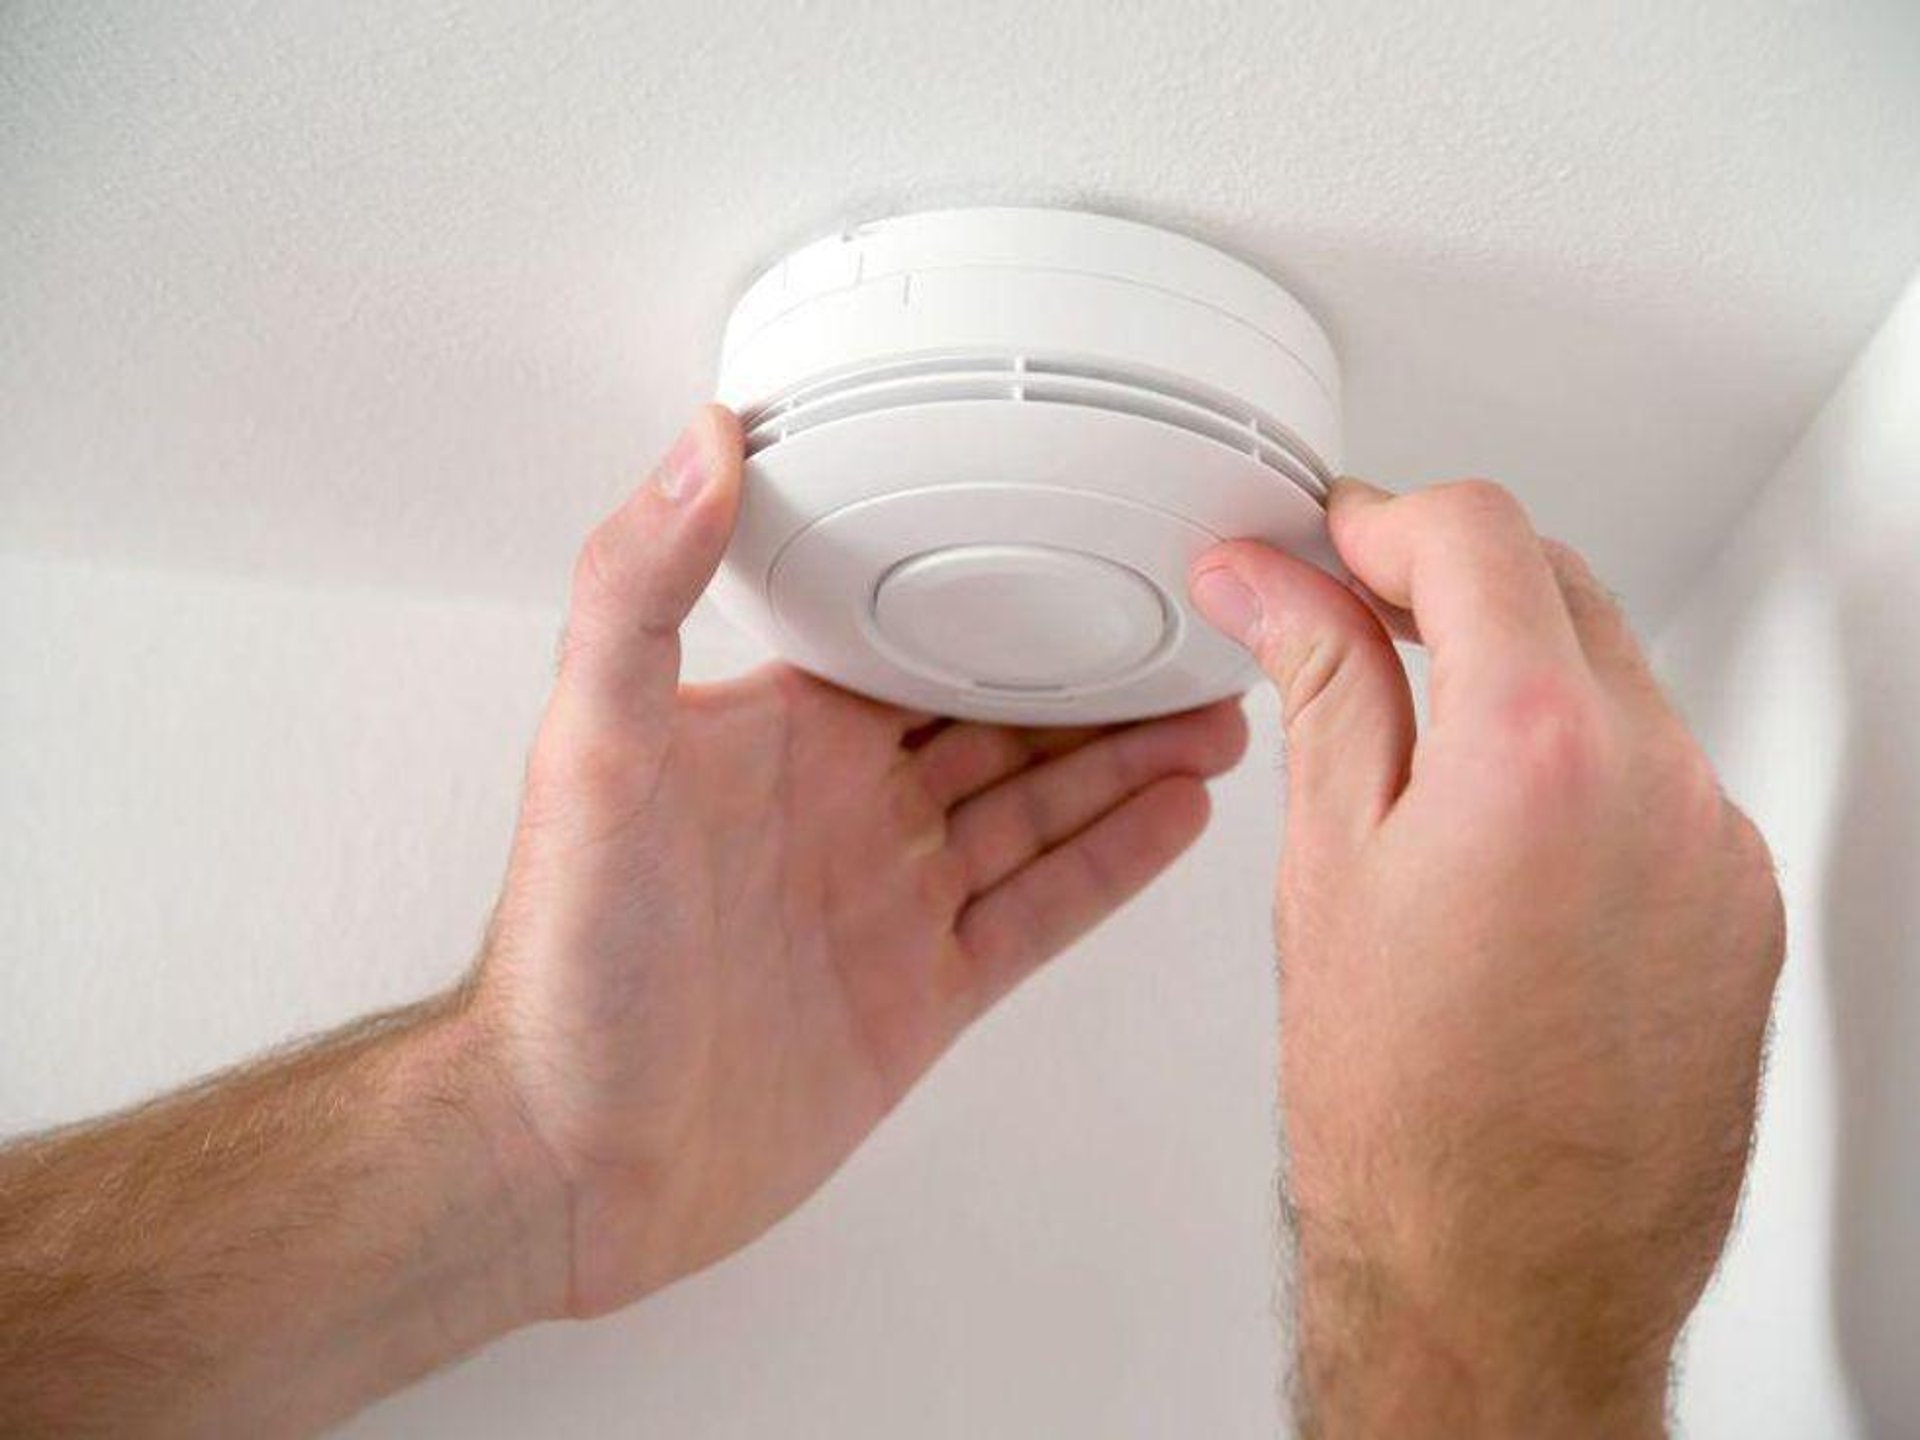 News Picture: Hurricane Season Starts June 1. Protect Your Family From Carbon Monoxide Dangers